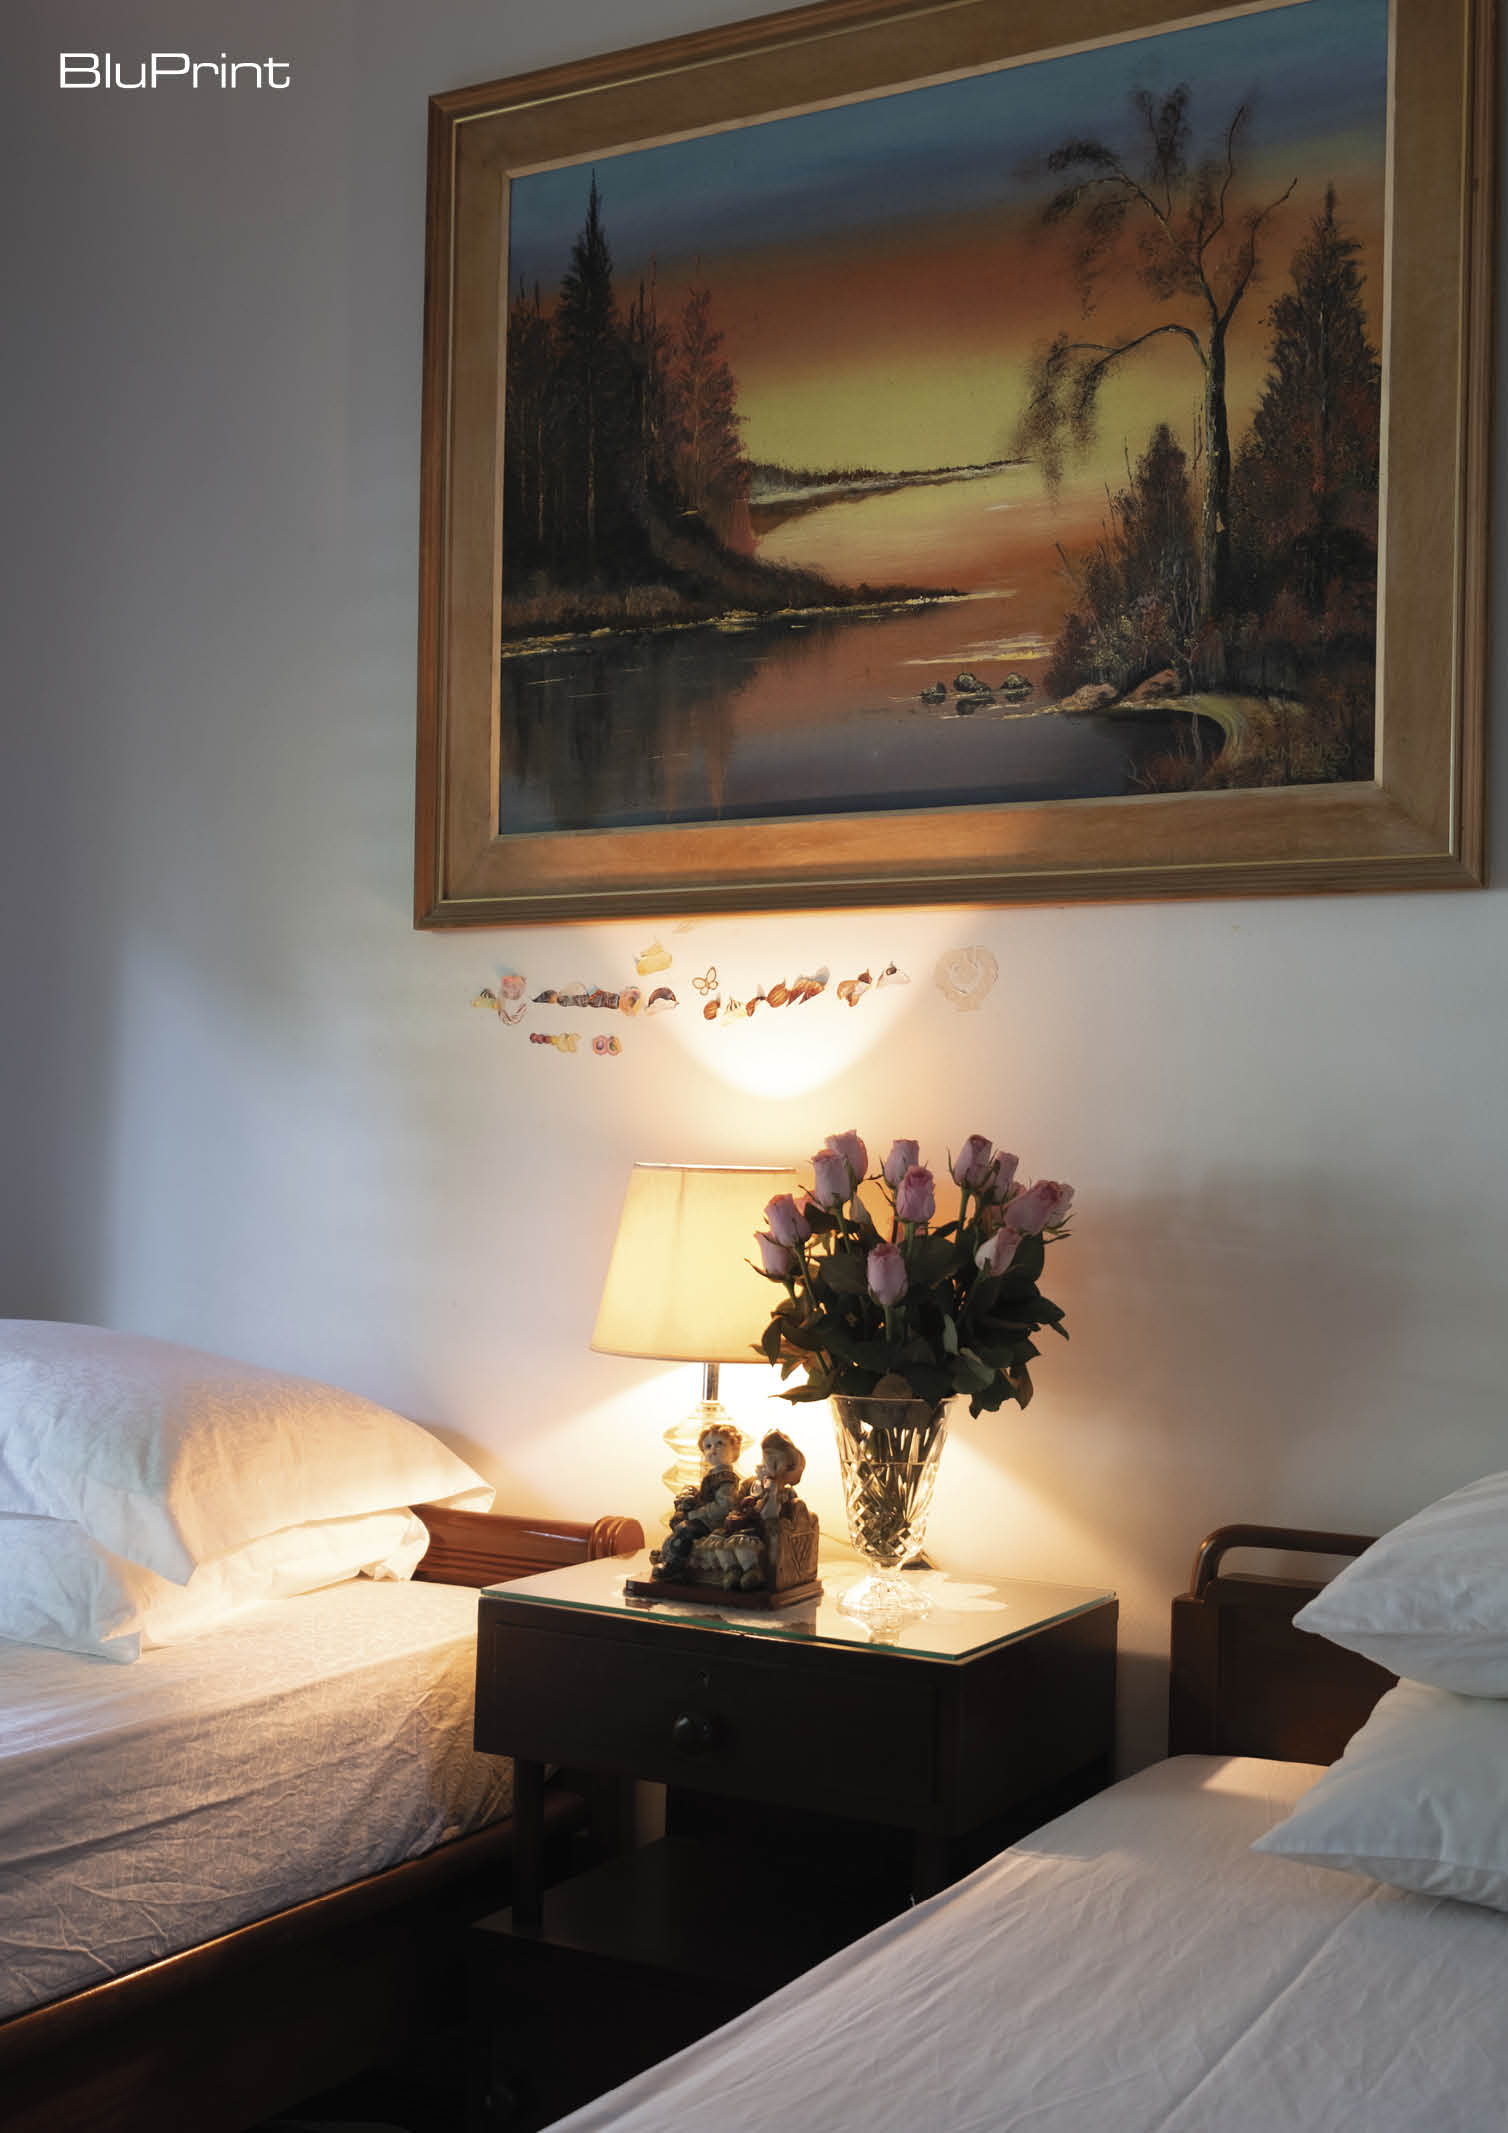 A bedroom with two twin beds and a side table with a floral arrangement in between. An oil painting hangs above it.